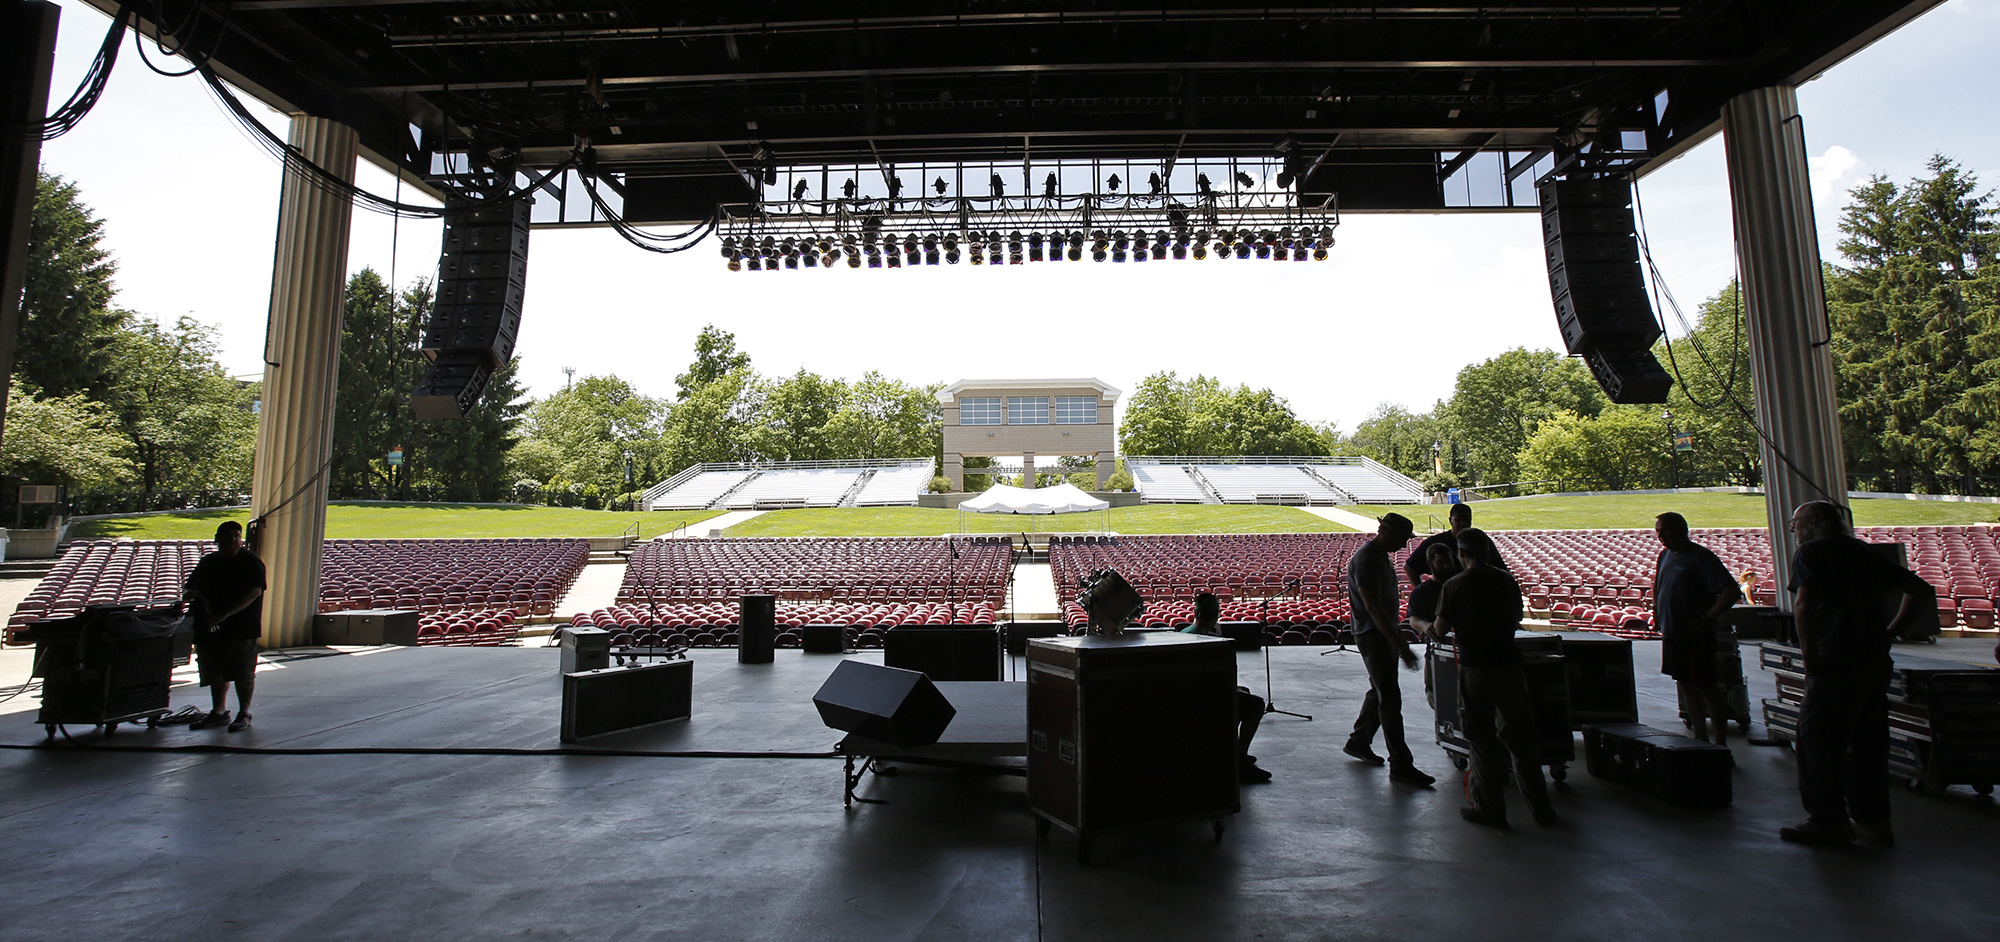 Fraze Pavilion 7 things to know about this Dayton concert venue